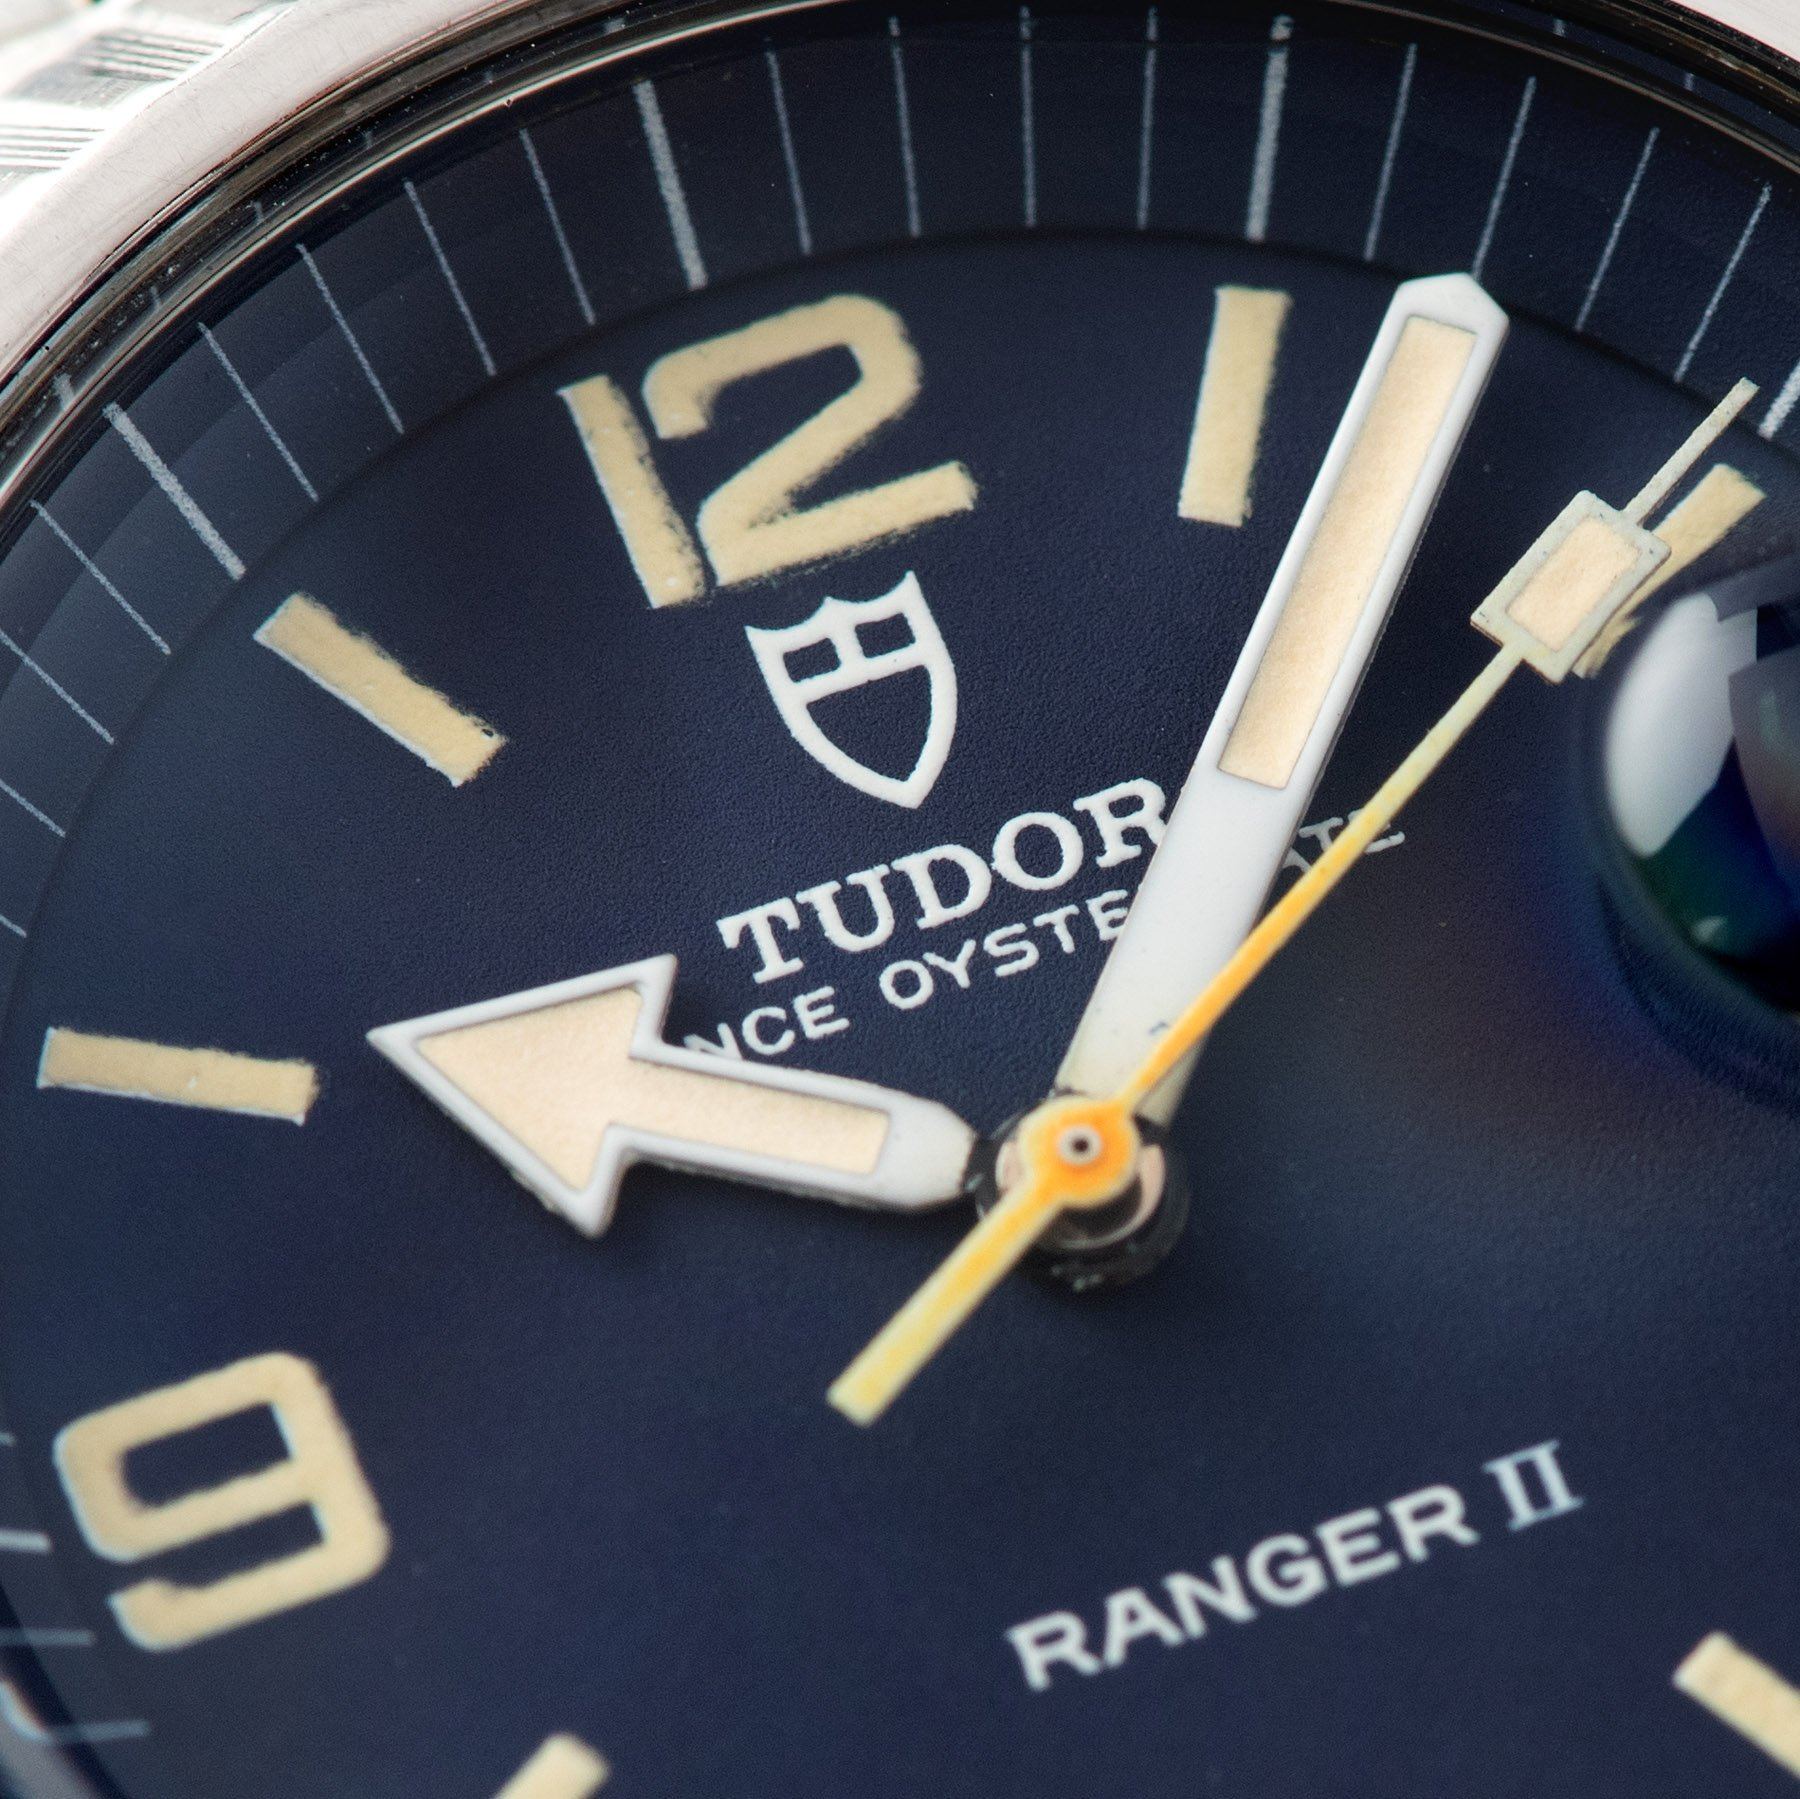 Tudor Ranger 2 Blue Dial Reference 9111/0 with a deep pie-pan dial in blue